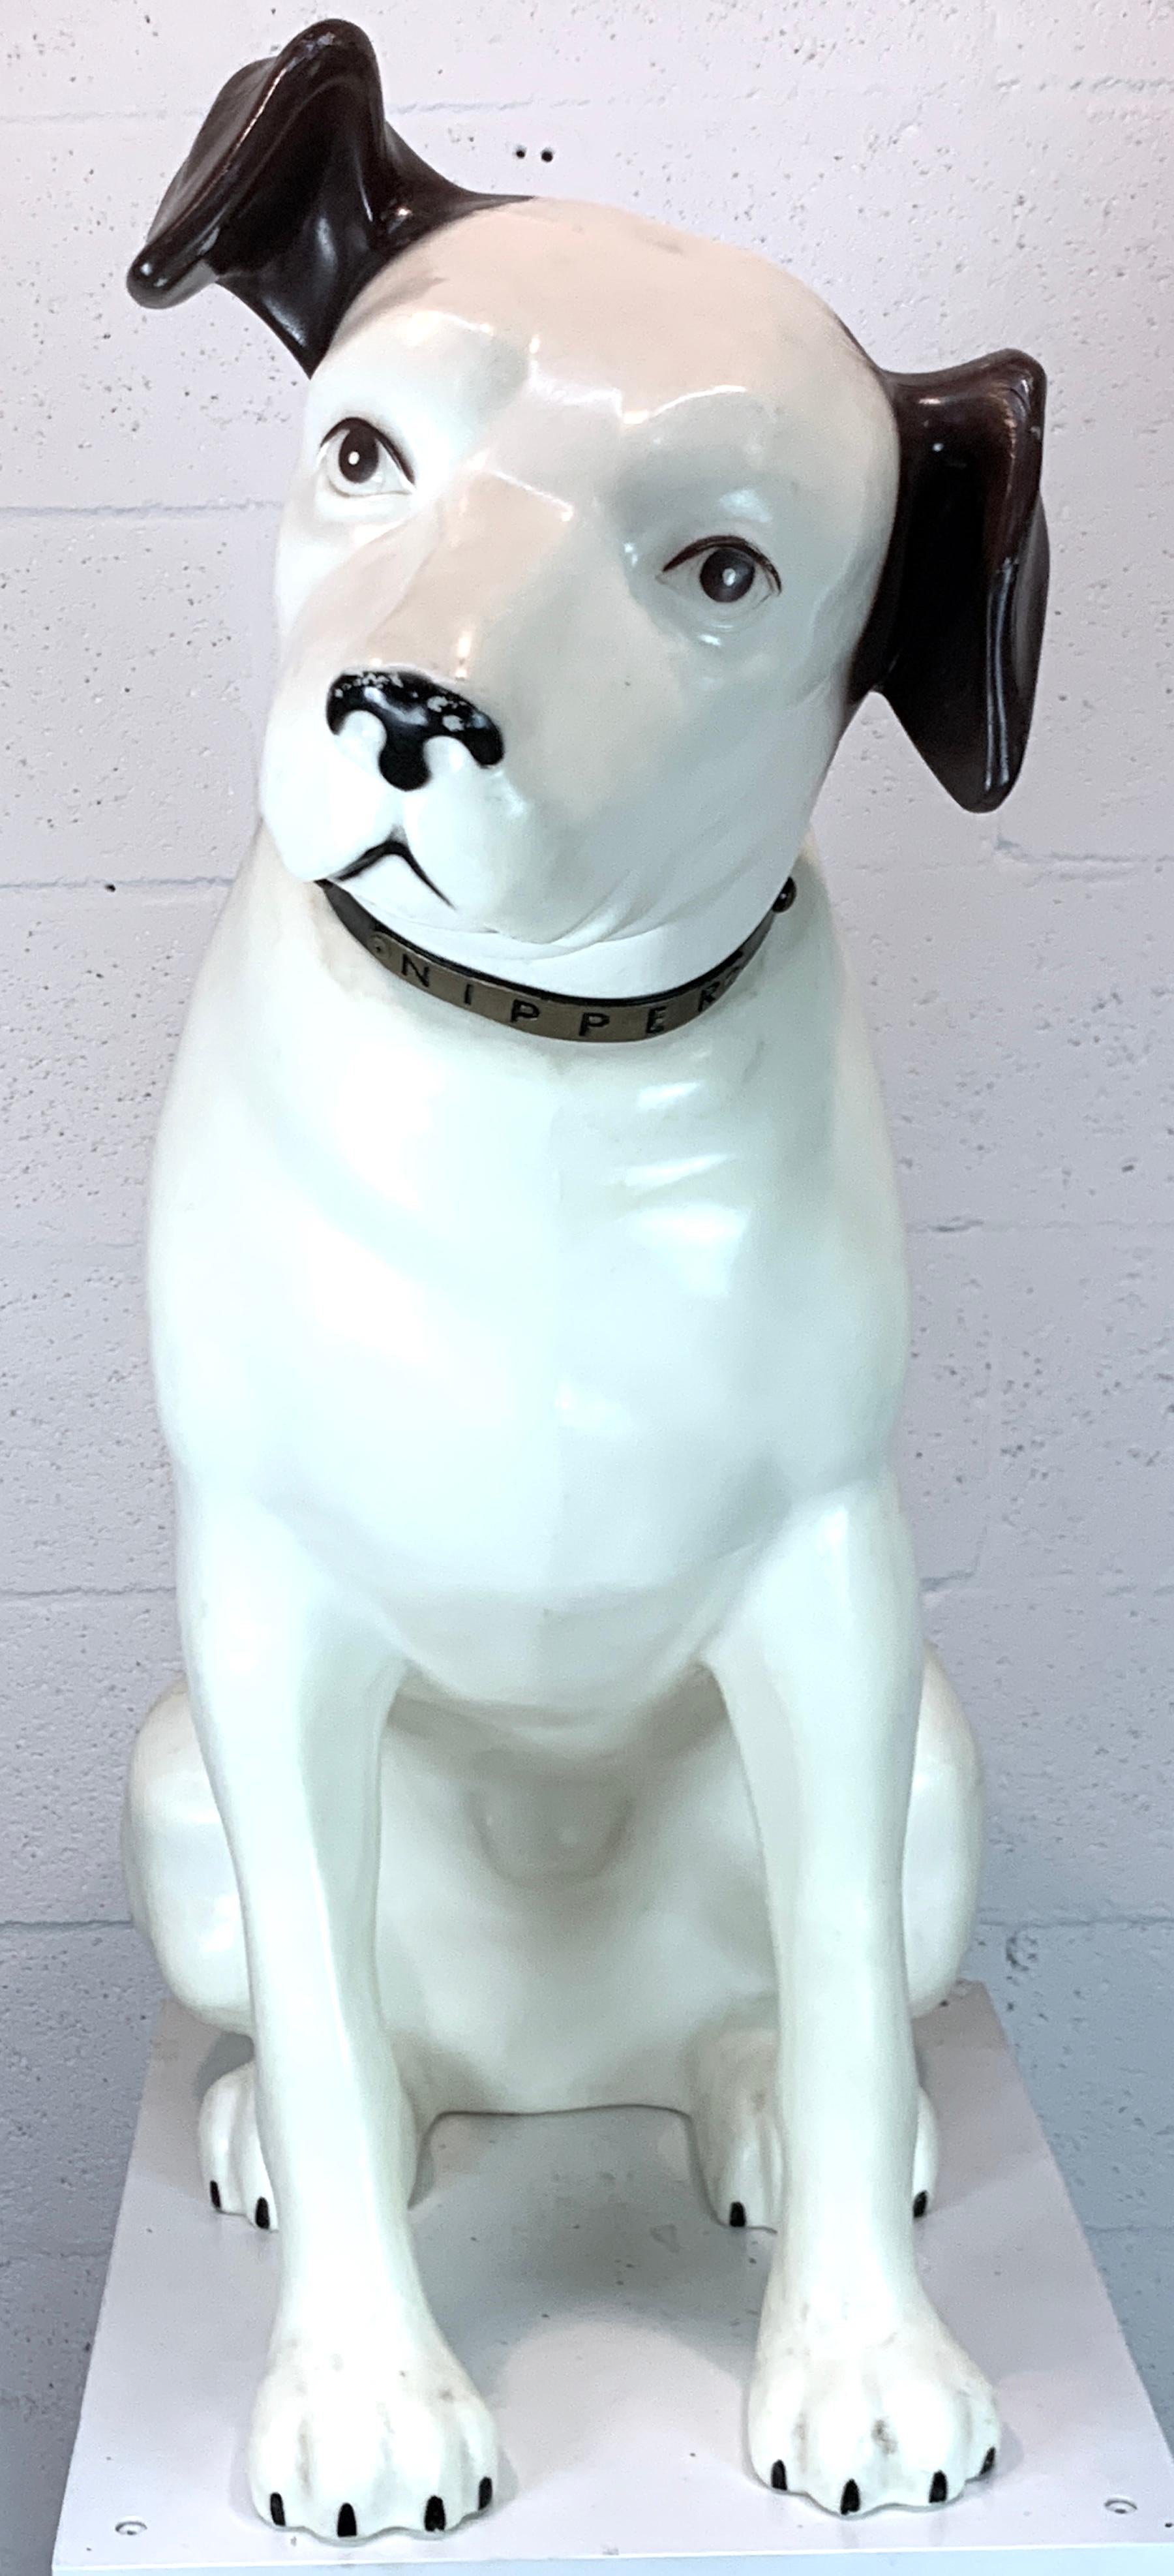 Nipper- His Masters Voice, RCA Trademark store display, larger than life size, this iconic advertising figure with his name 'Nipper' on his collar. Retains the General Electric Trademark label.
Nipper stands 37-inches high x 36-inches wide x